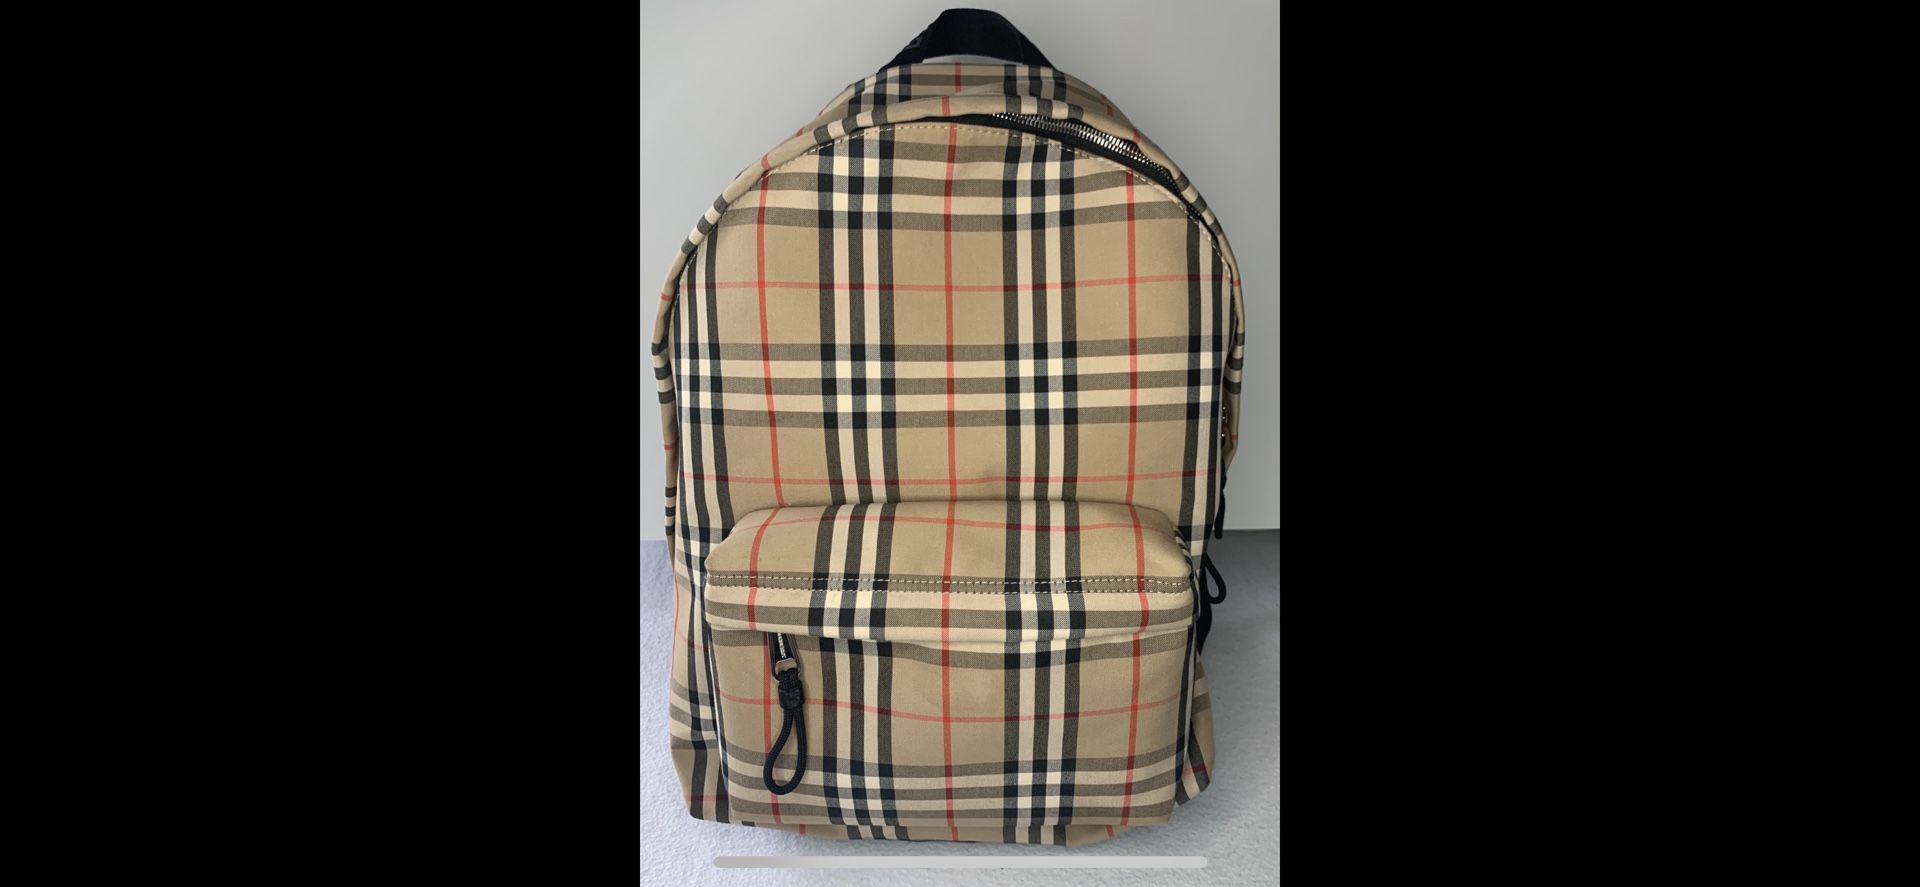 Burberry Backpack - never been used!